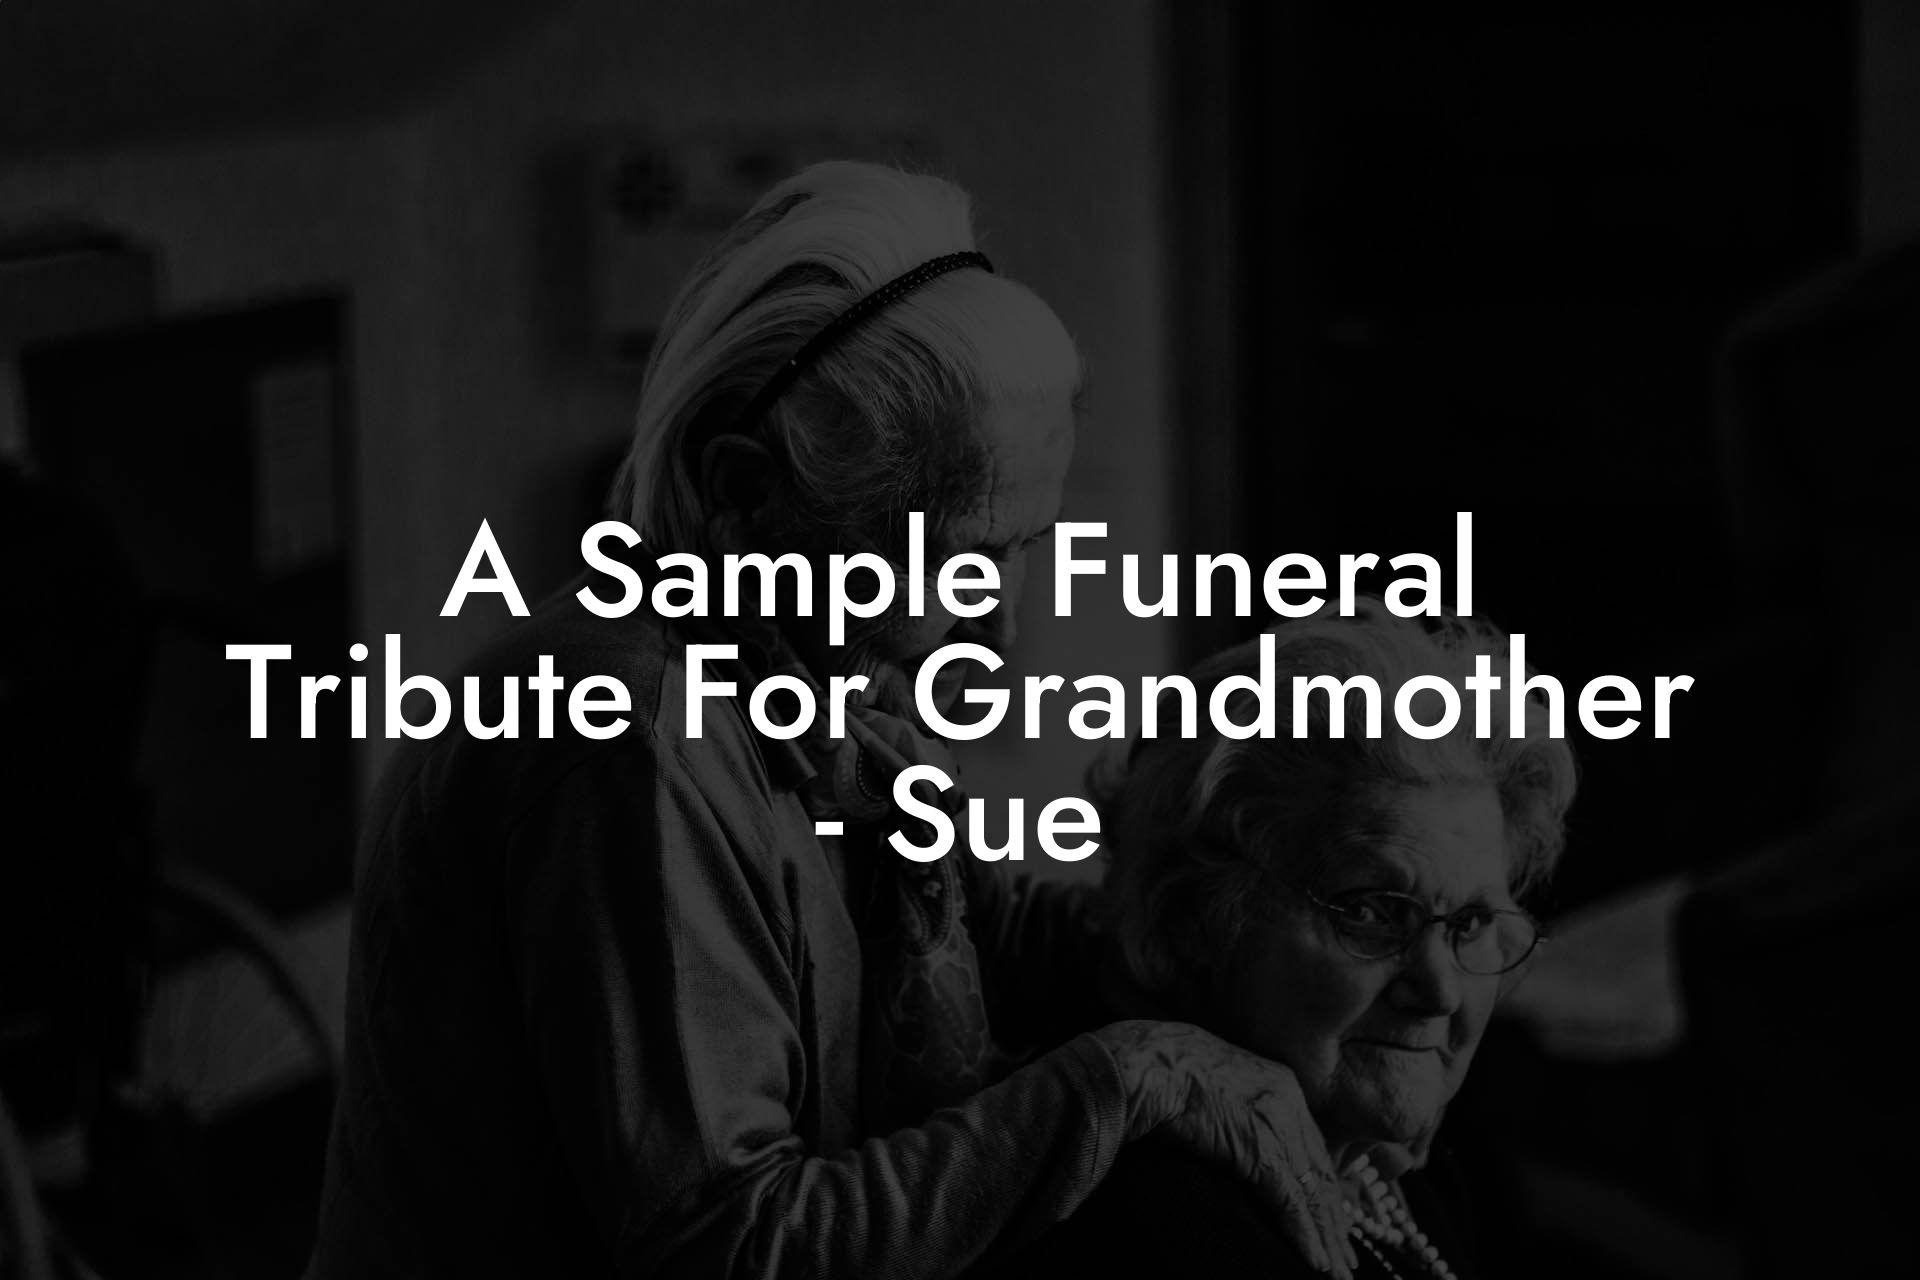 A Sample Funeral Tribute For Grandmother - Sue